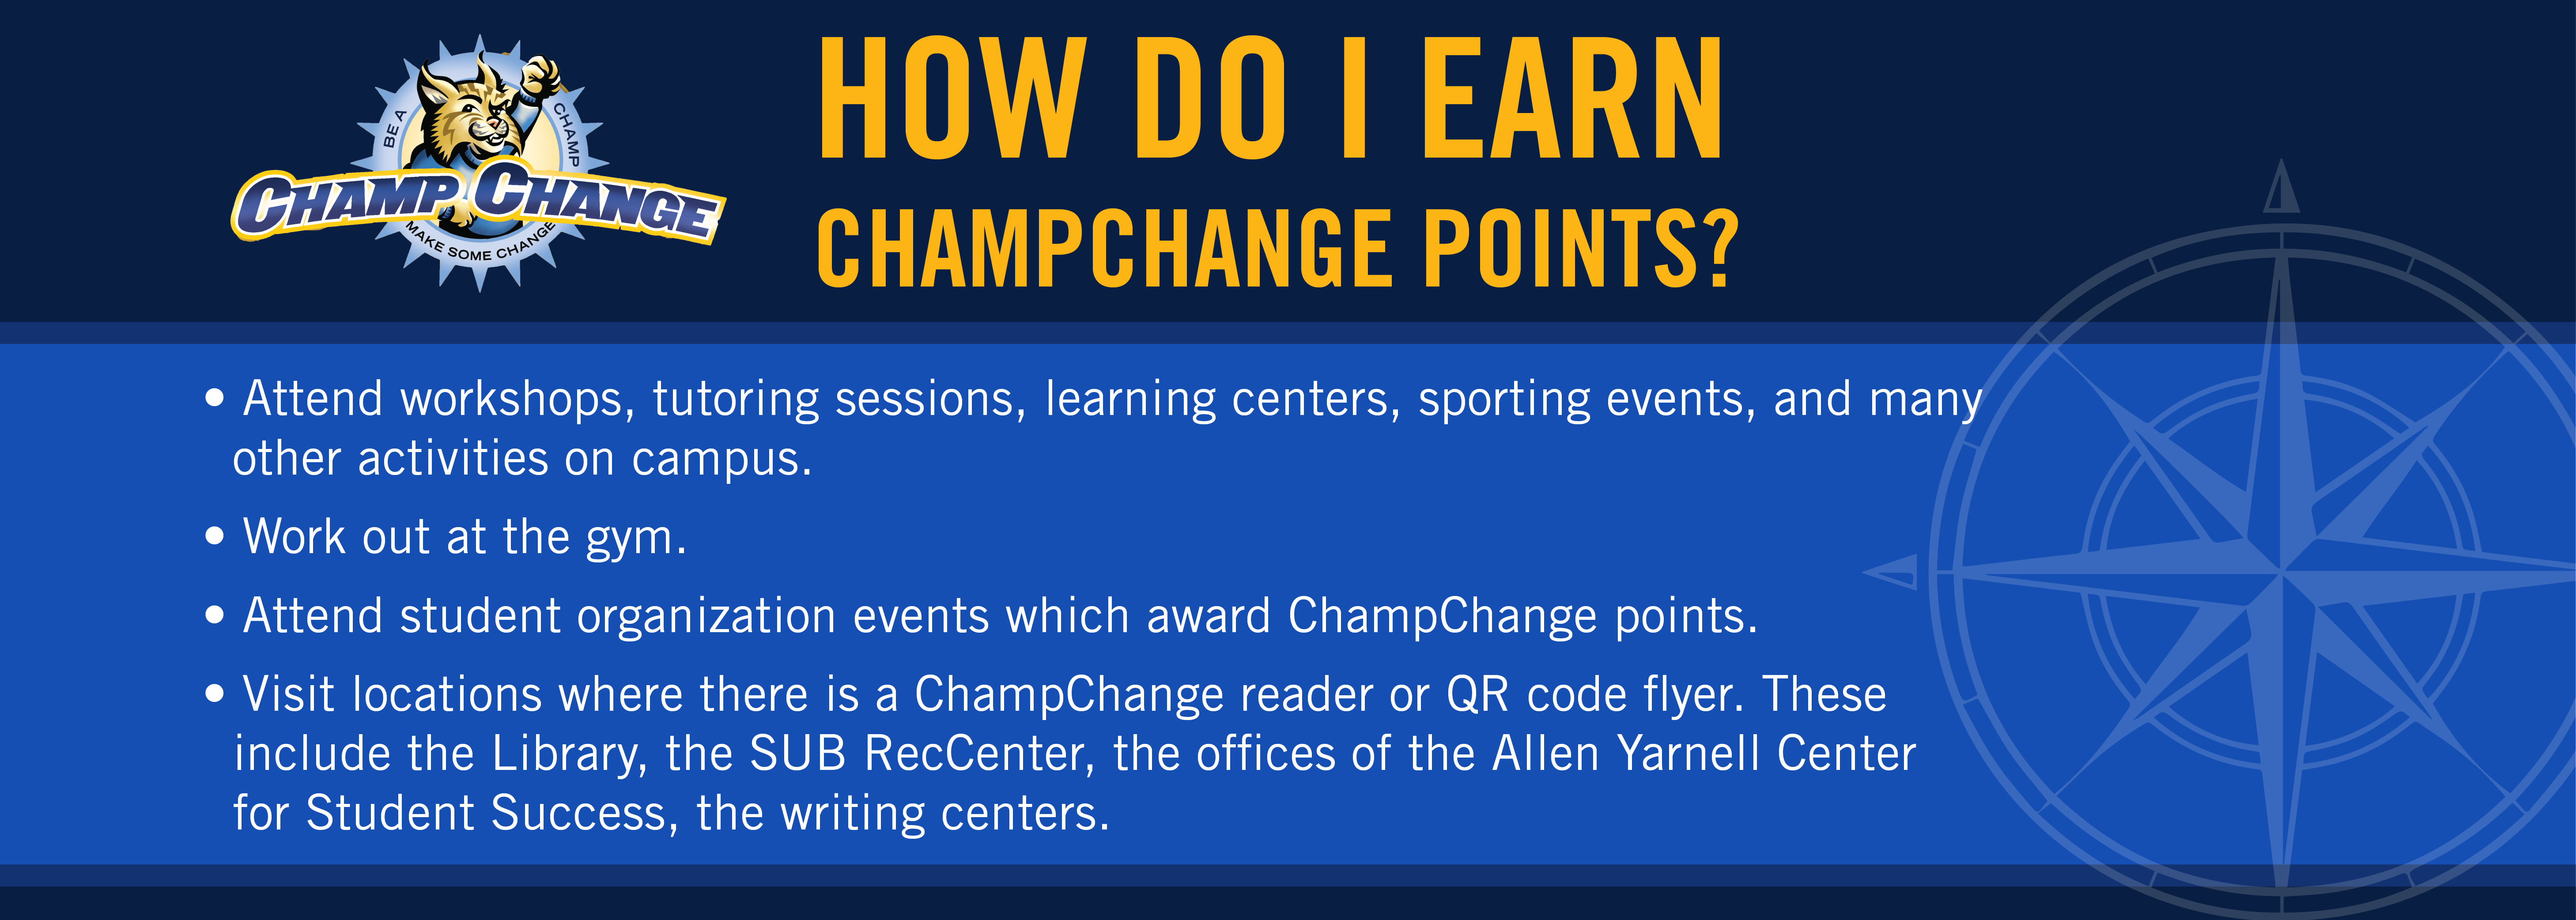 How to earn champchange points